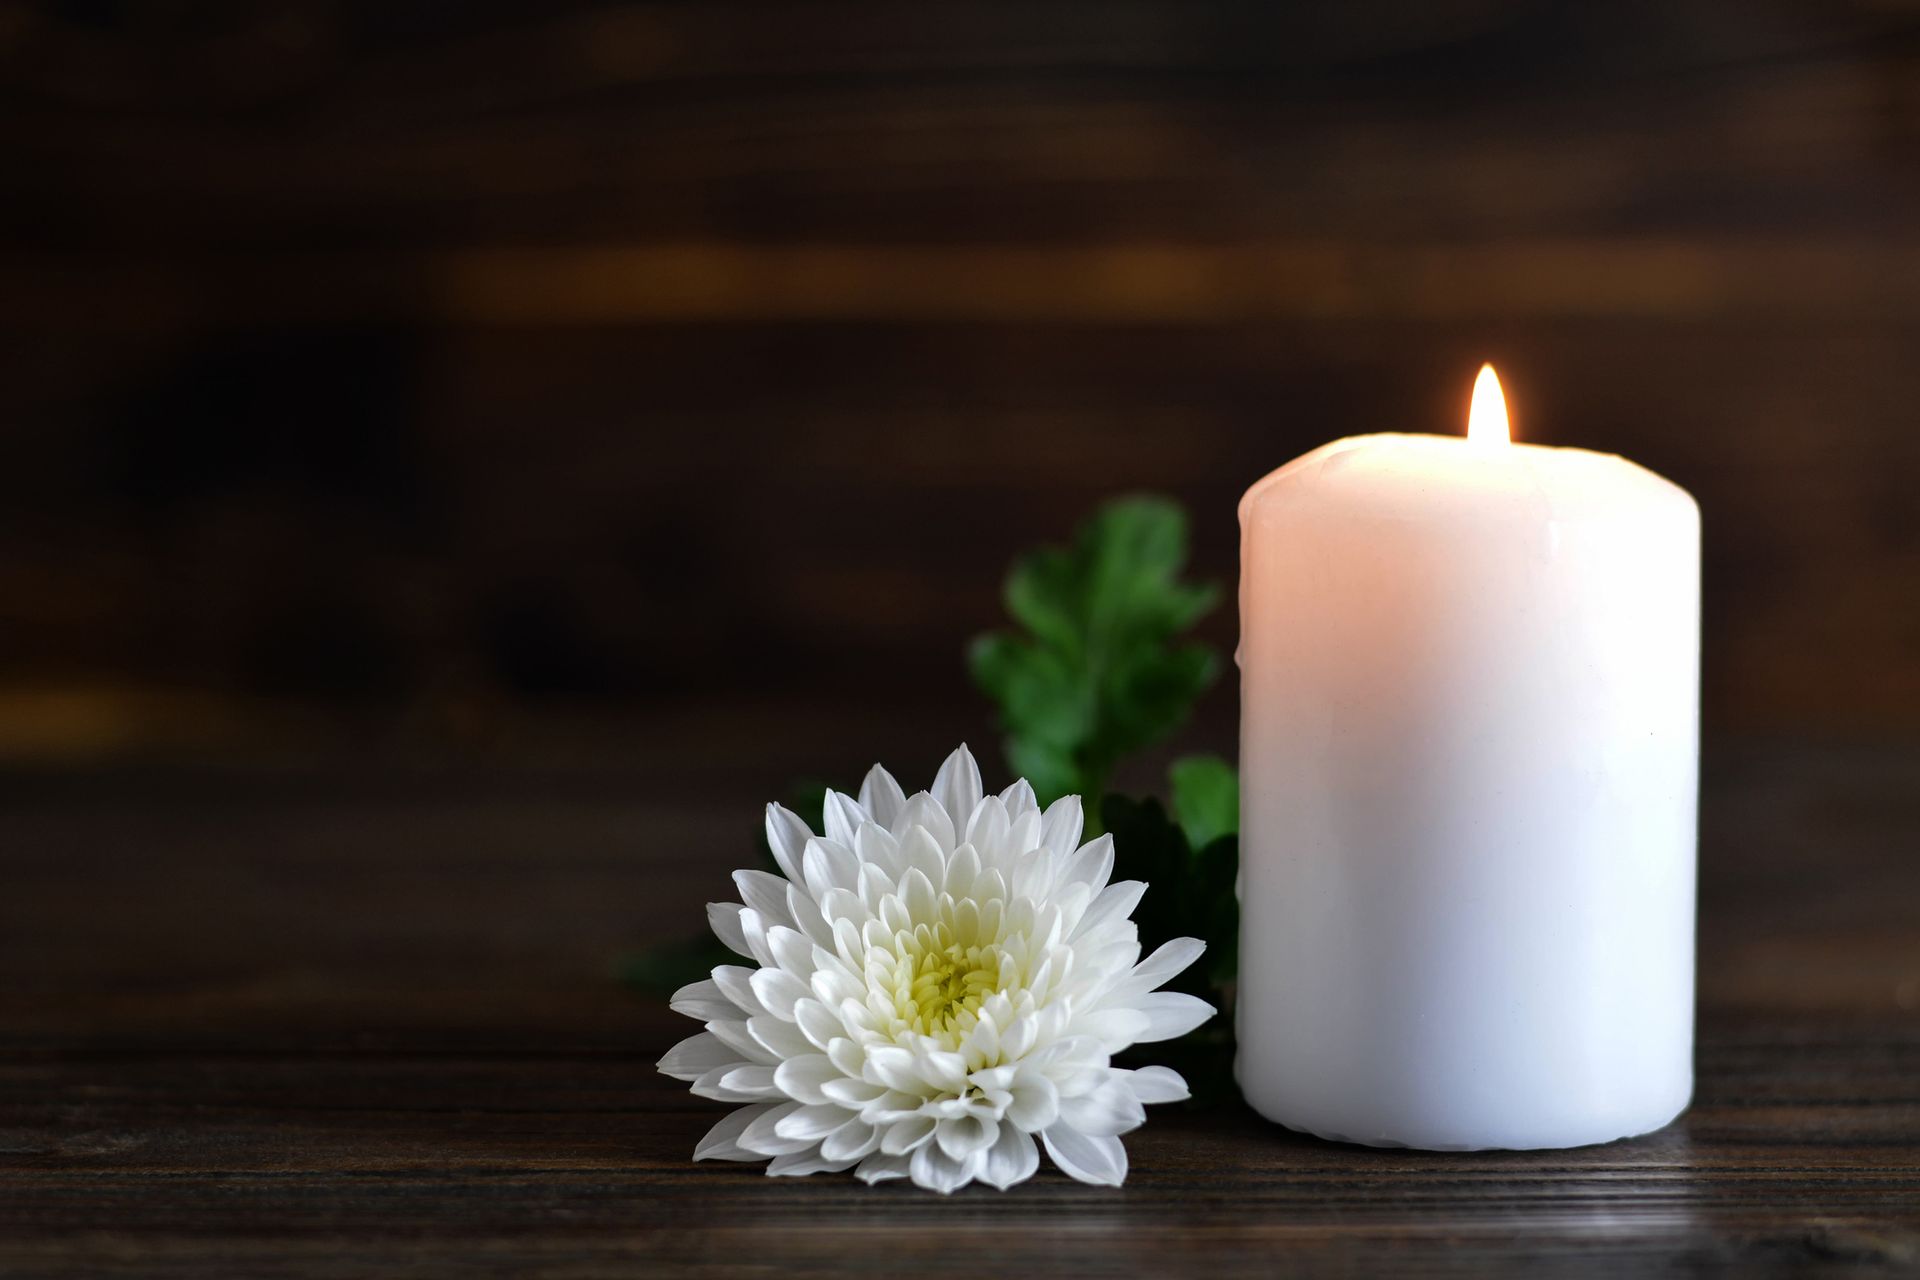 A white candle and a white flower on a wooden table.